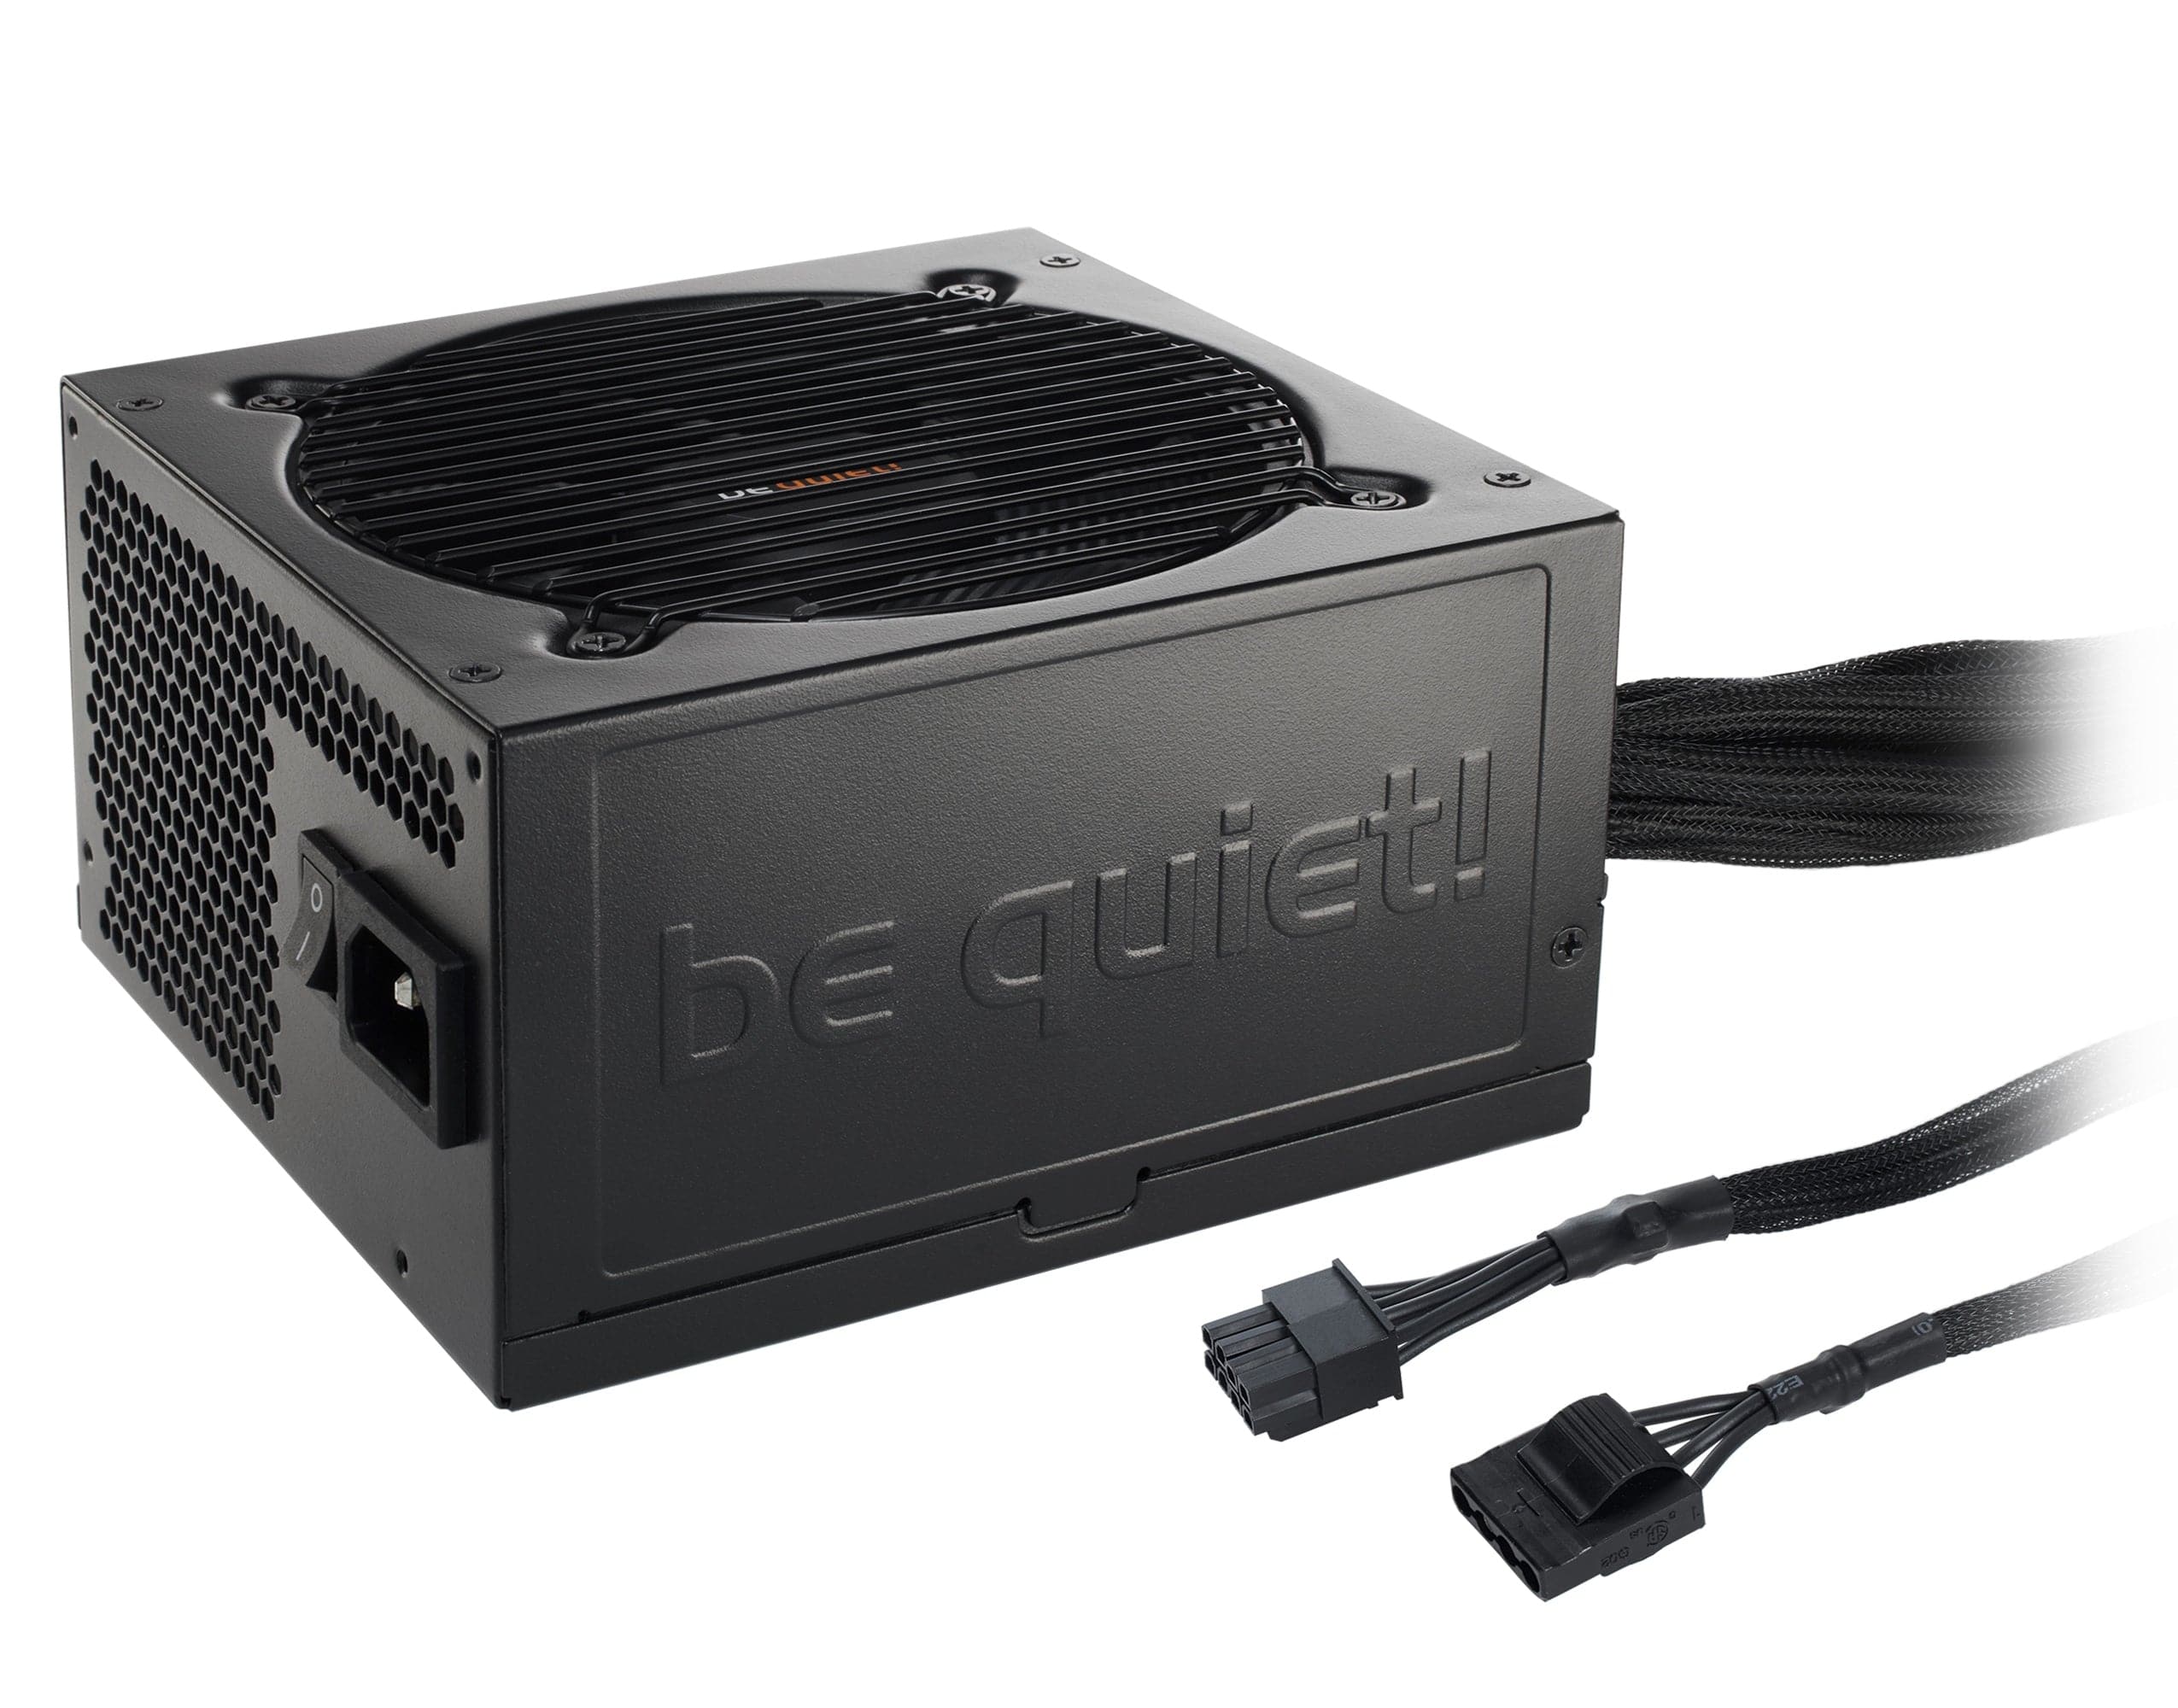 be quiet! Pure Power 11 - 700W be quiet!